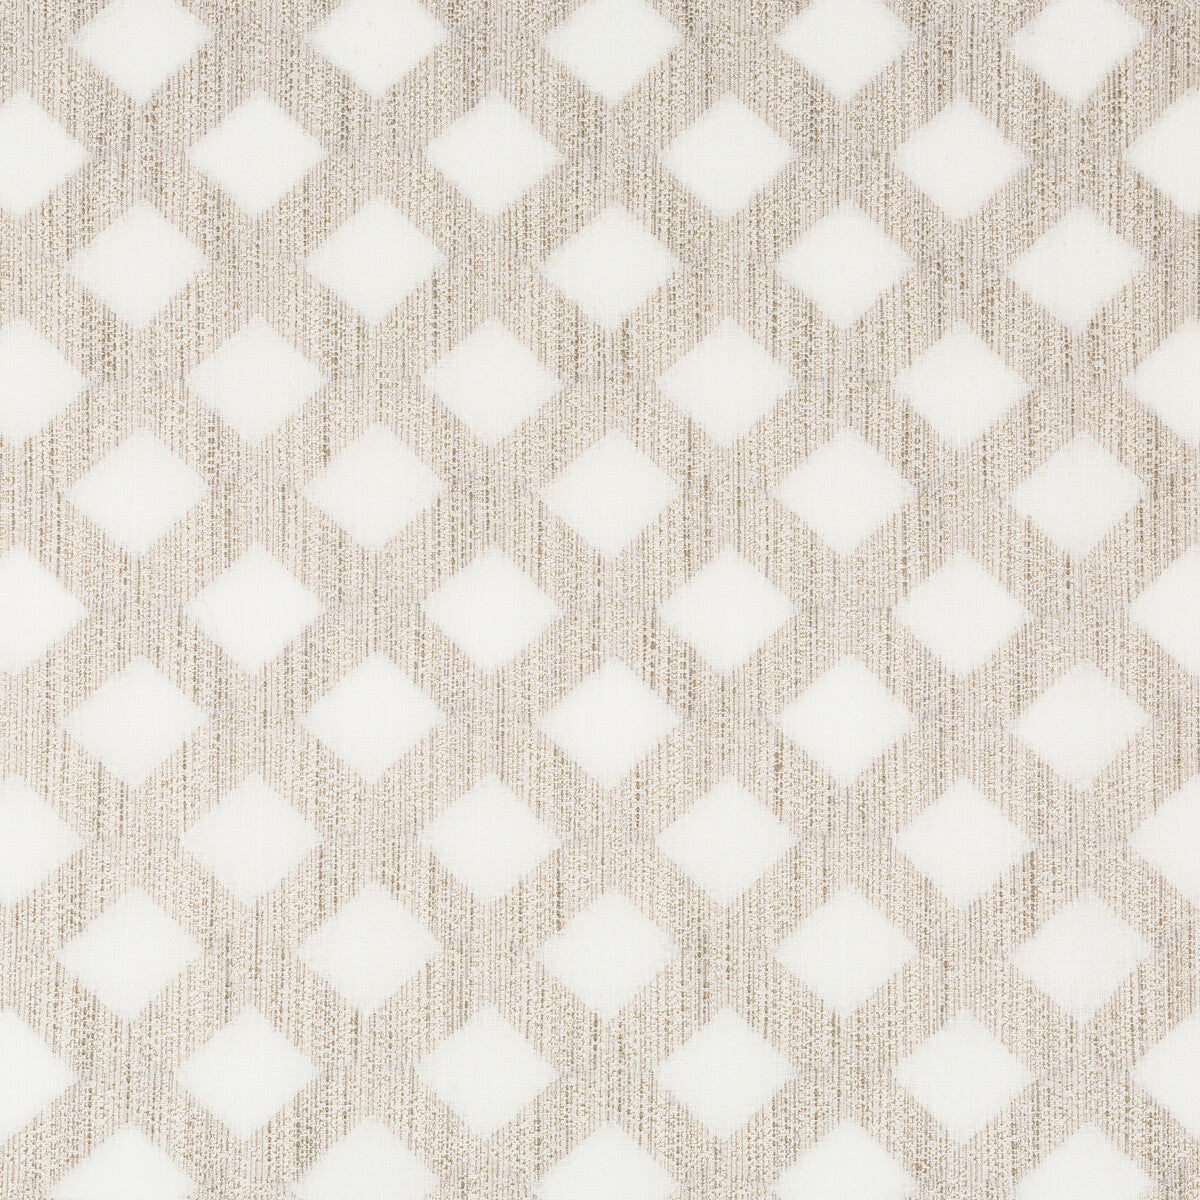 Odin fabric in pumice color - pattern 4832.16.0 - by Kravet Contract